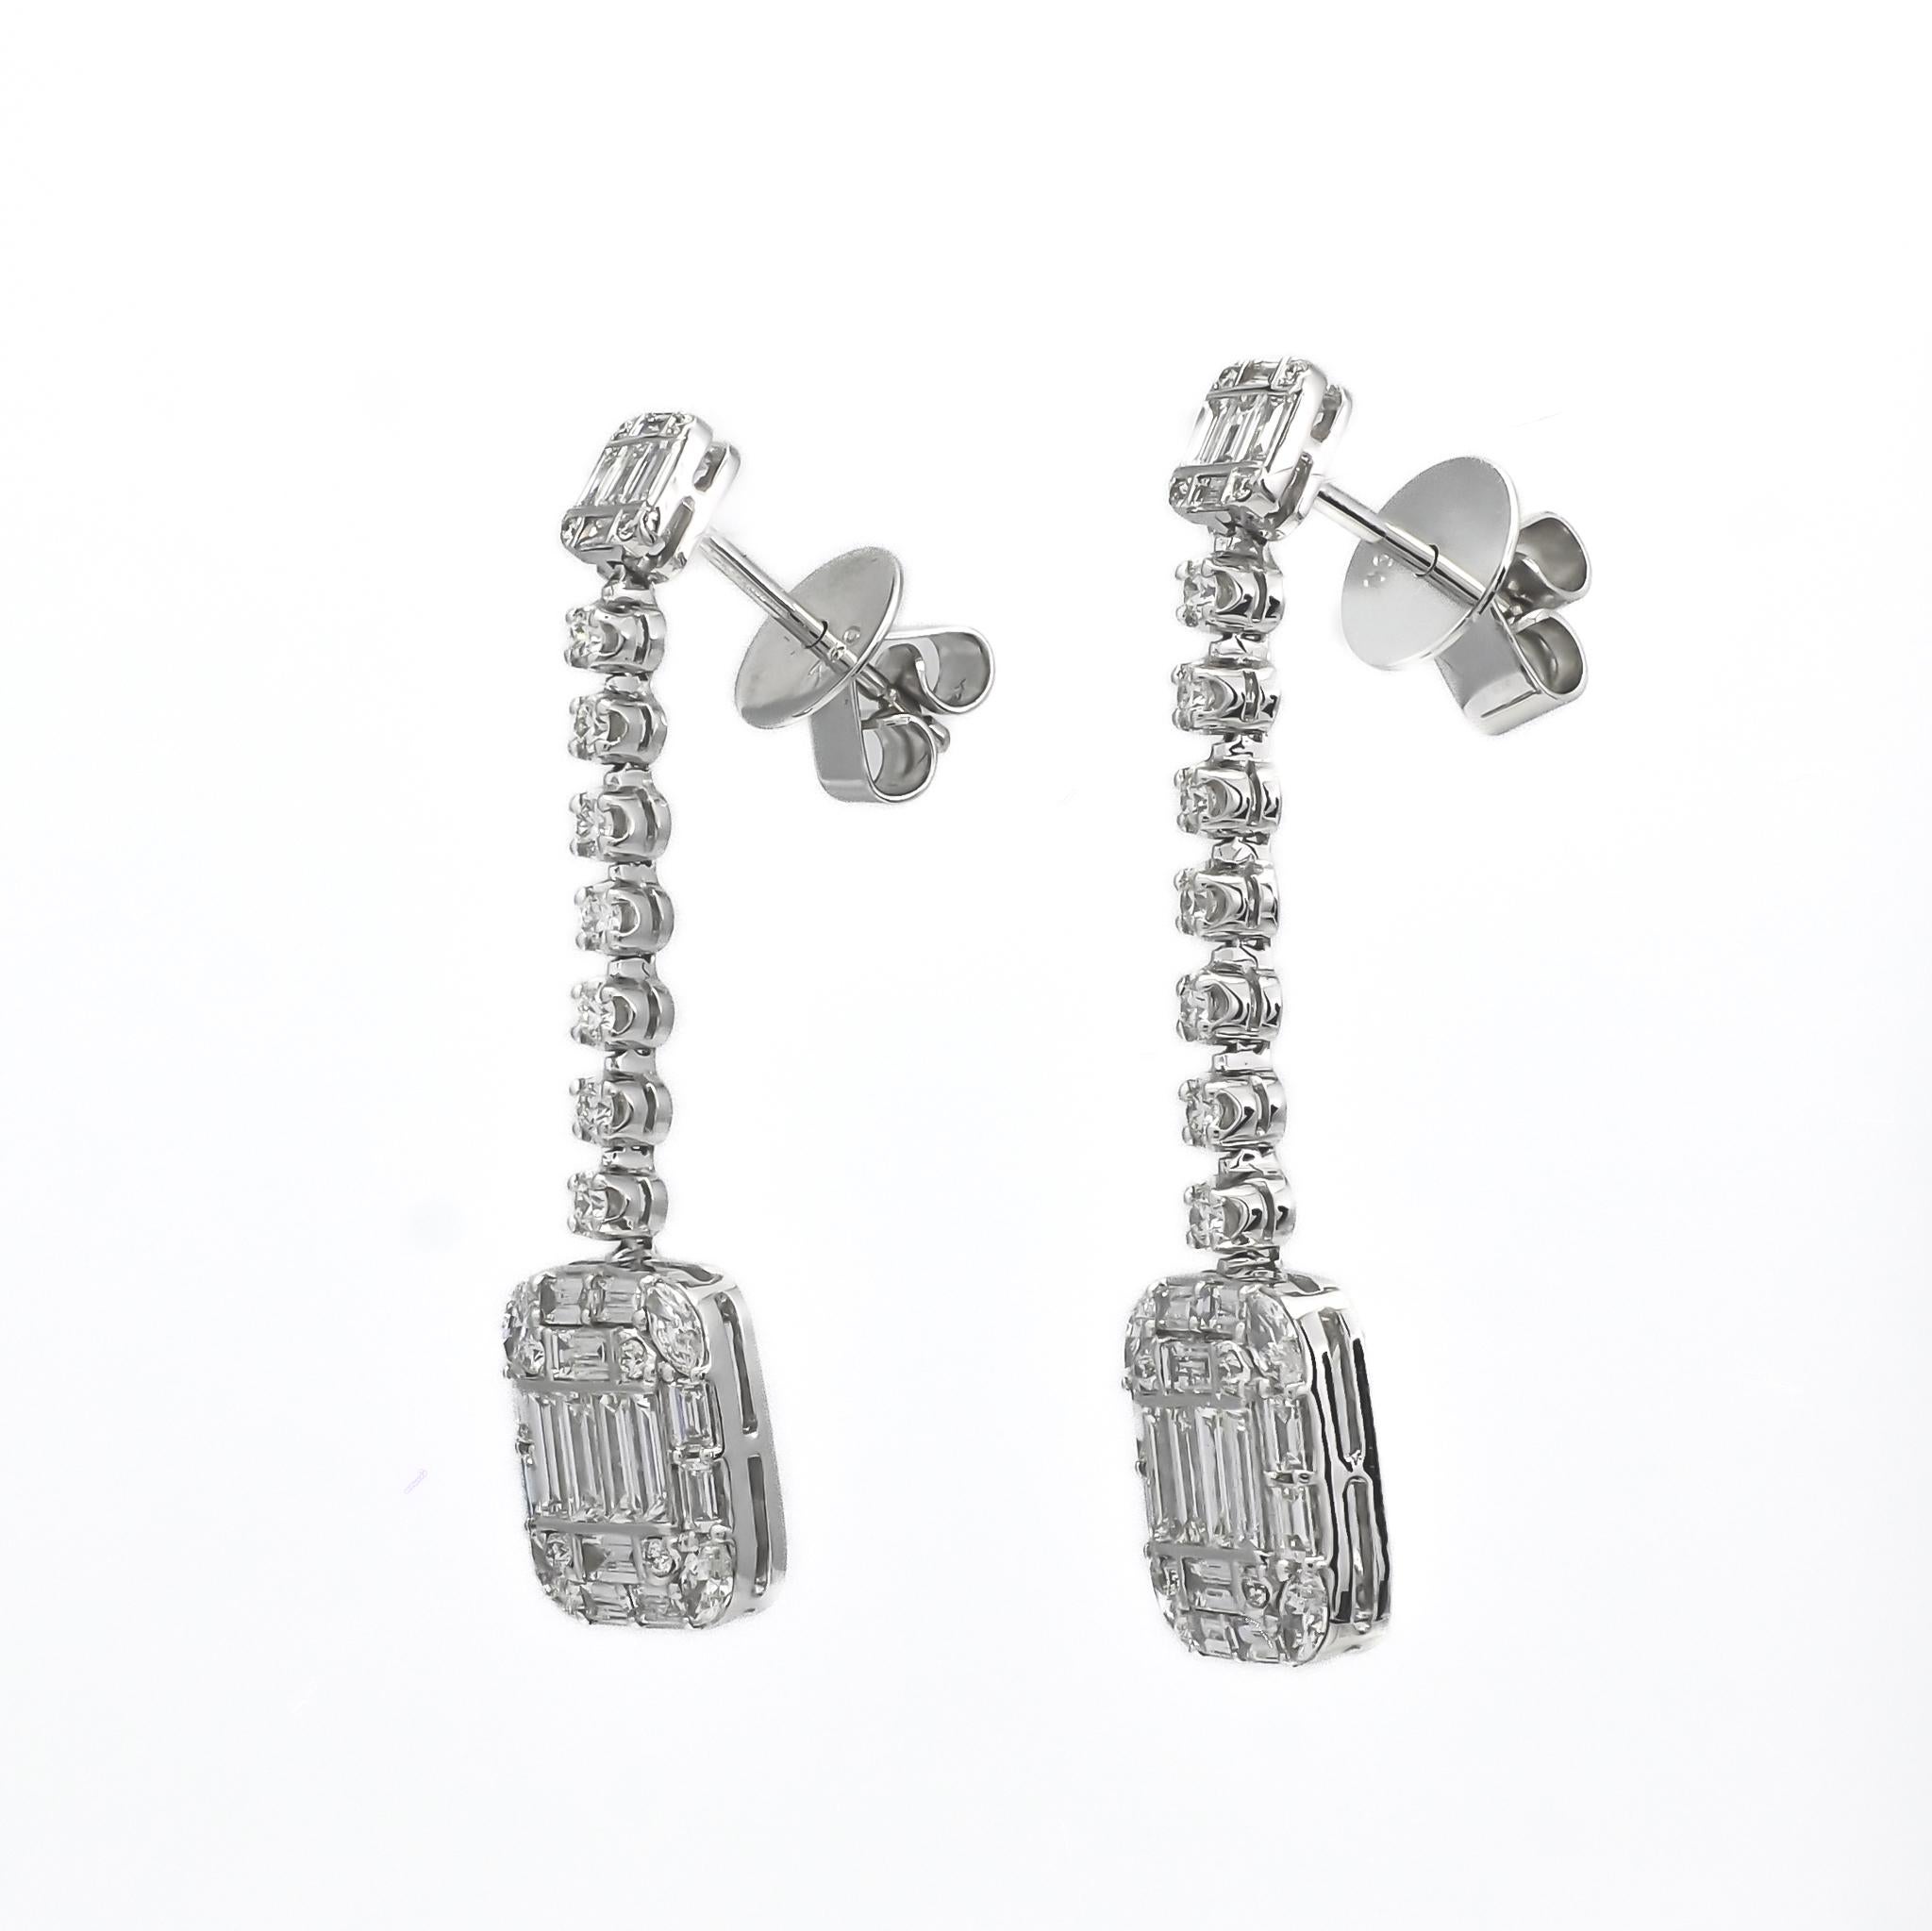 Baguette Cut Natural Diamond Earrings 2.07 cts 18 Karat White Gold Statement Earring For Sale